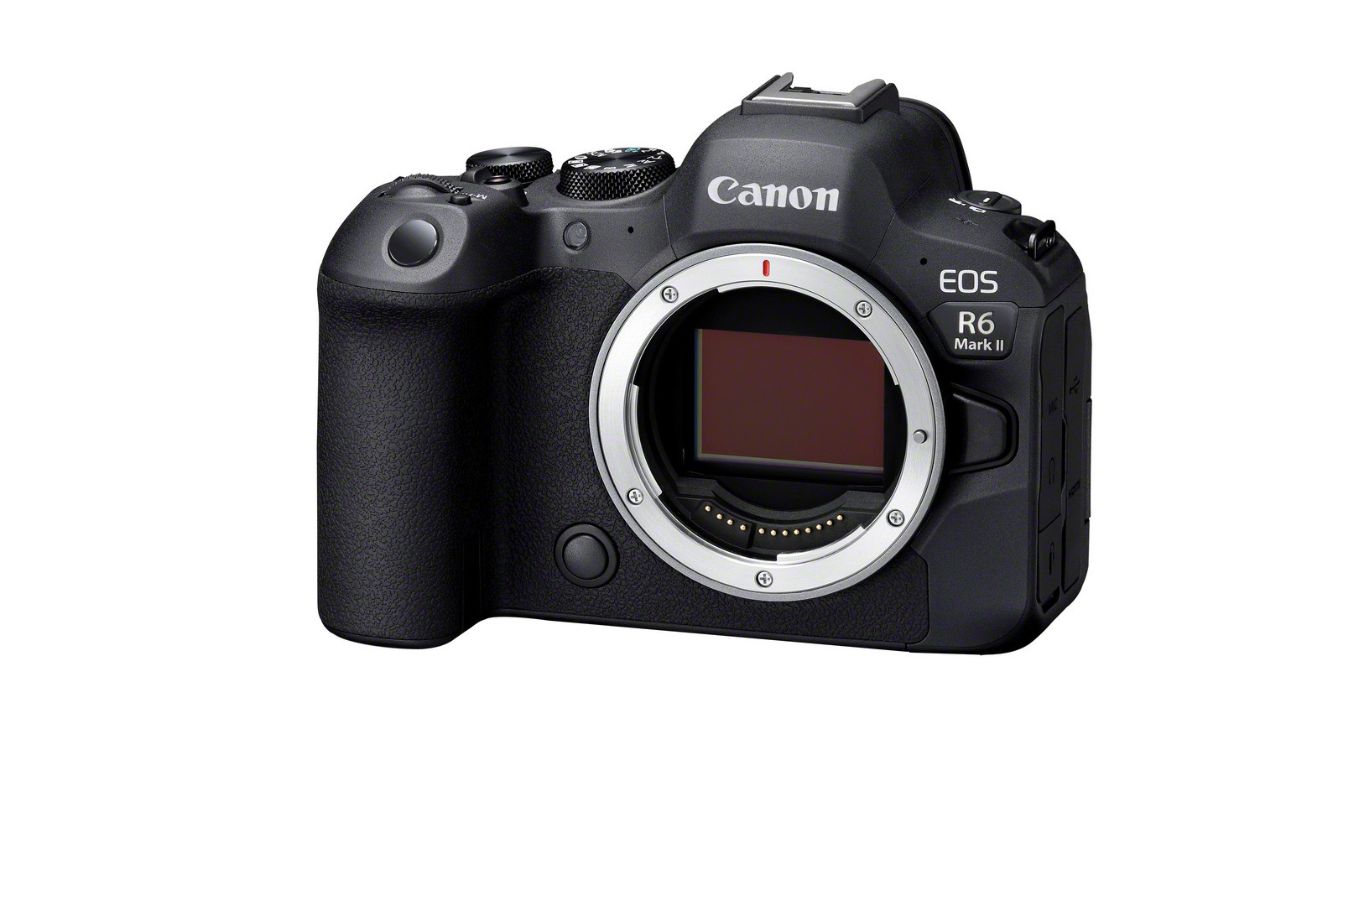 Canon EOS R6 Mark II Body Only - Product Photo 2 - Front side view of the camera body with the internal components visible